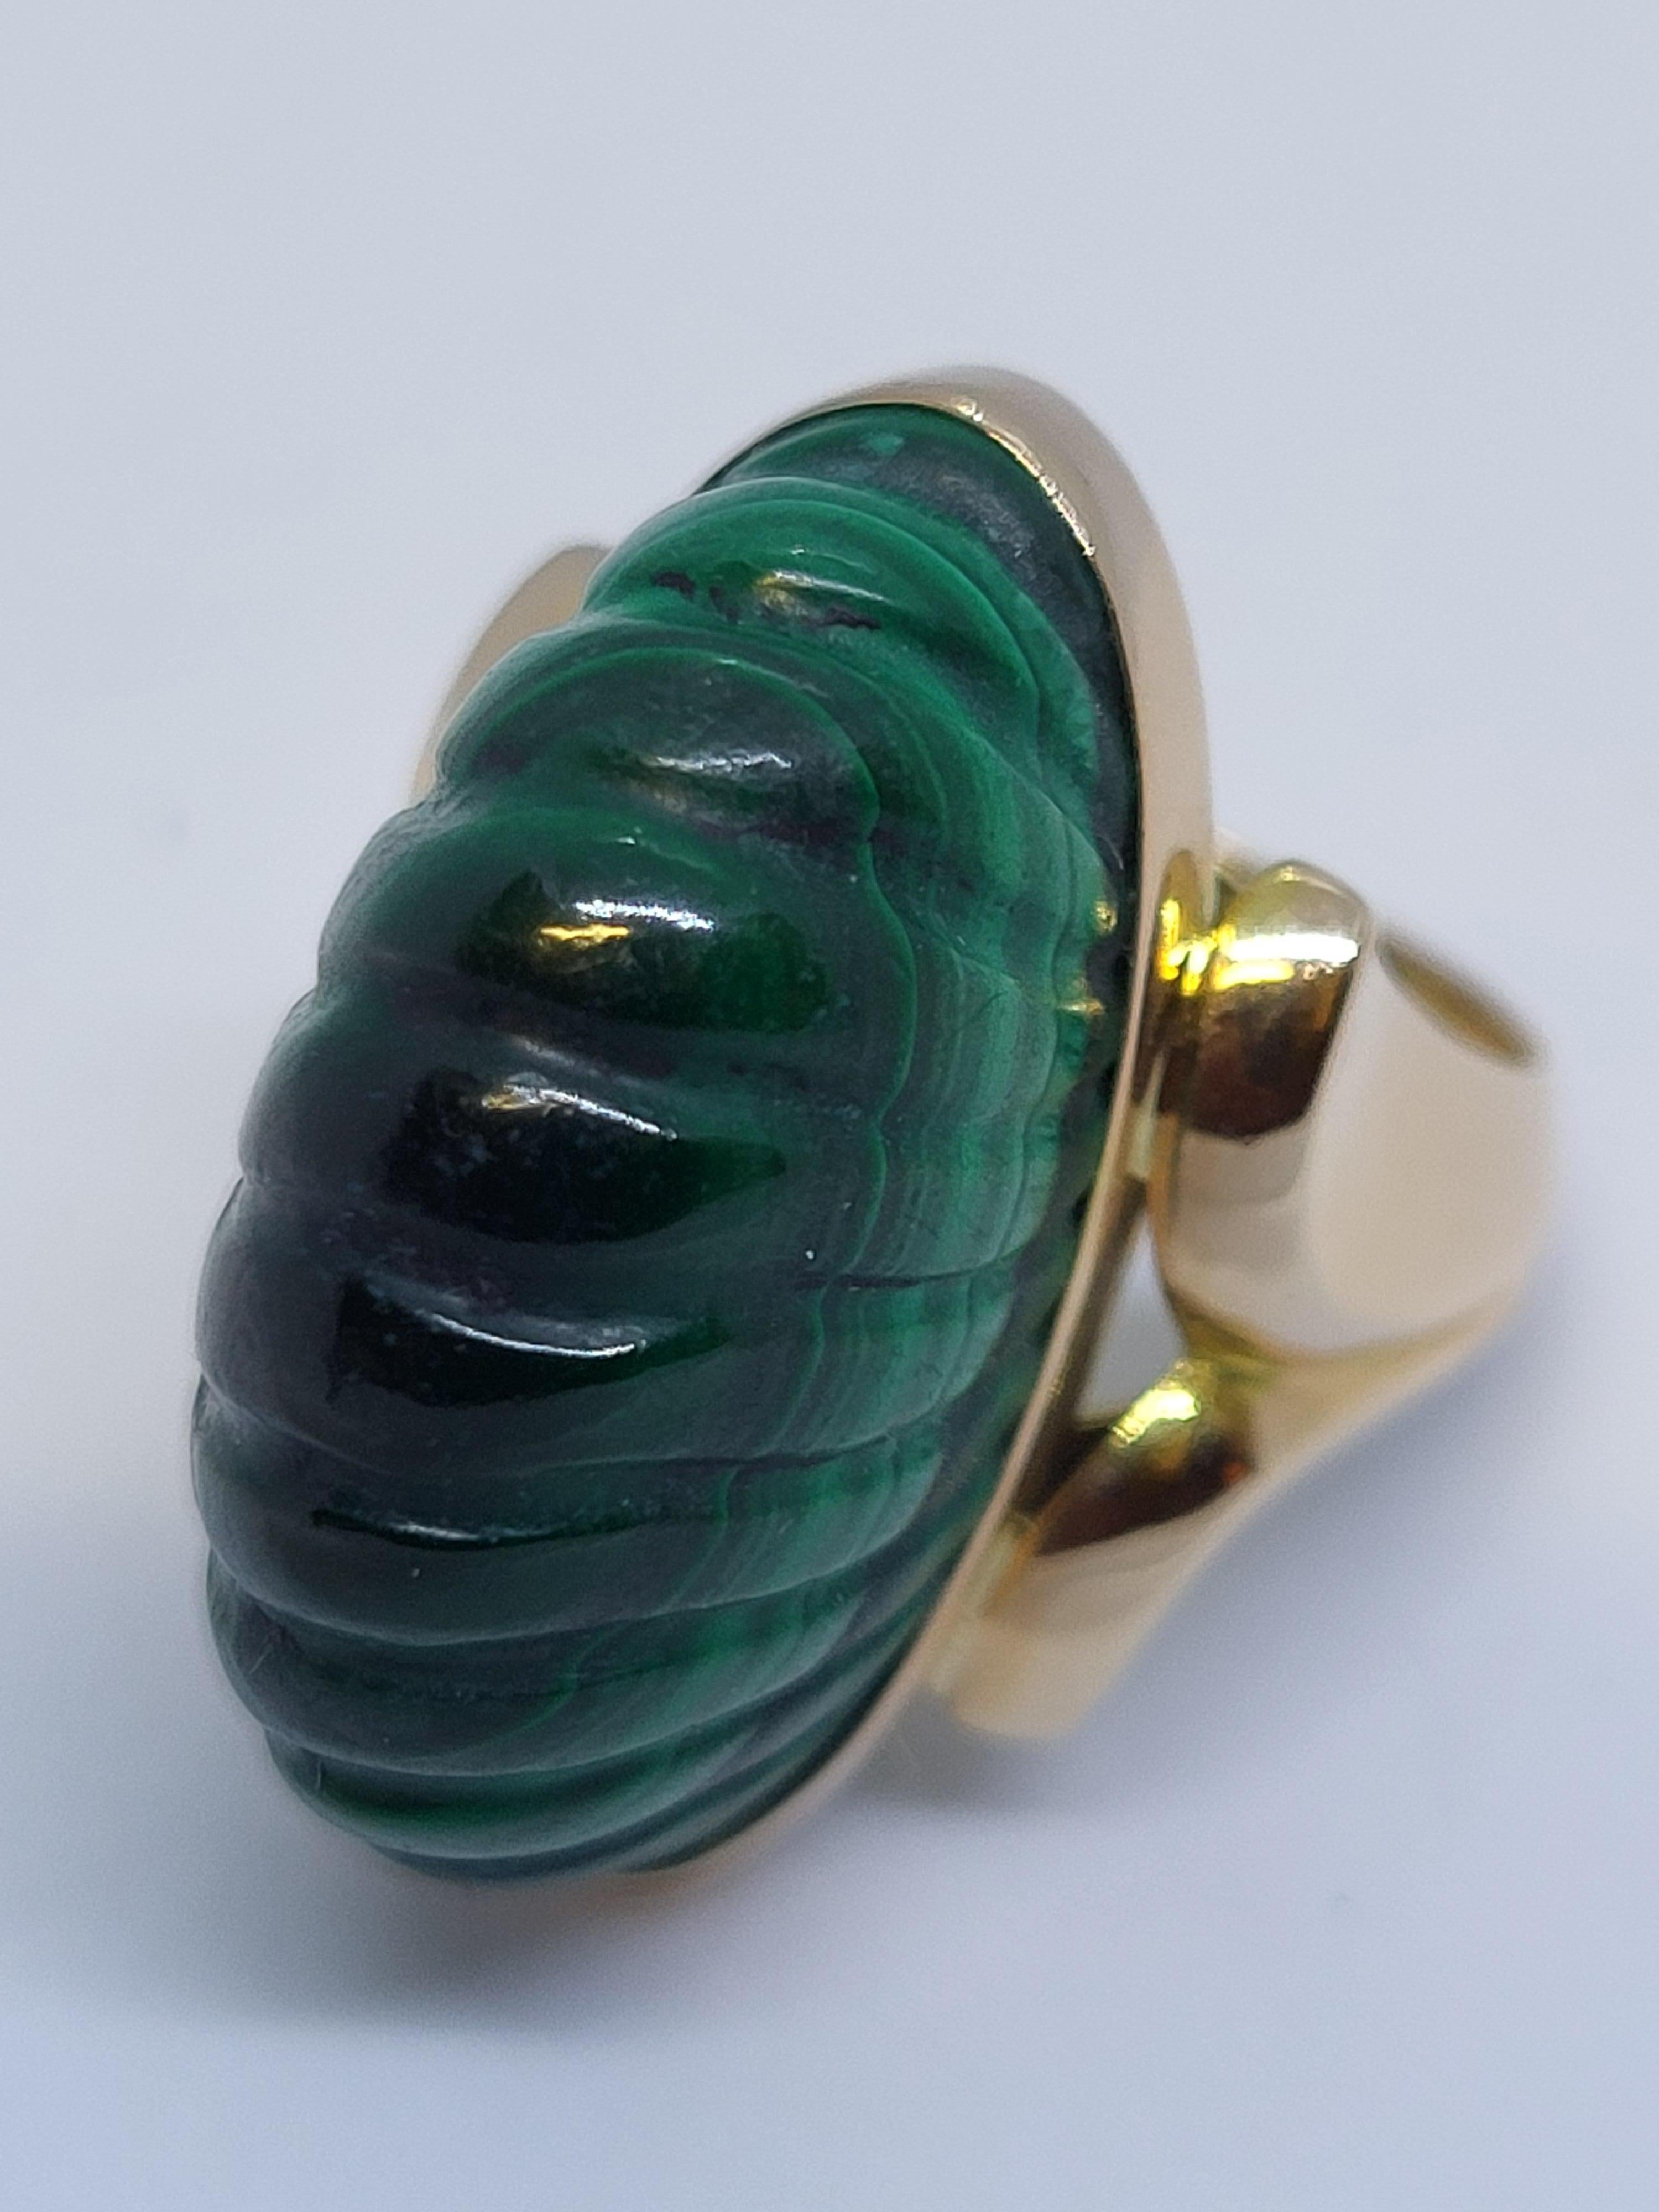 Beautifully carved malachite and rose gold dome ring made in Russia, ca. 1915.
The rich color in shades of green is enhanced by the expertise of the carver. 
A statement piece for the independant lady - colorful but elegant at the same time.
The